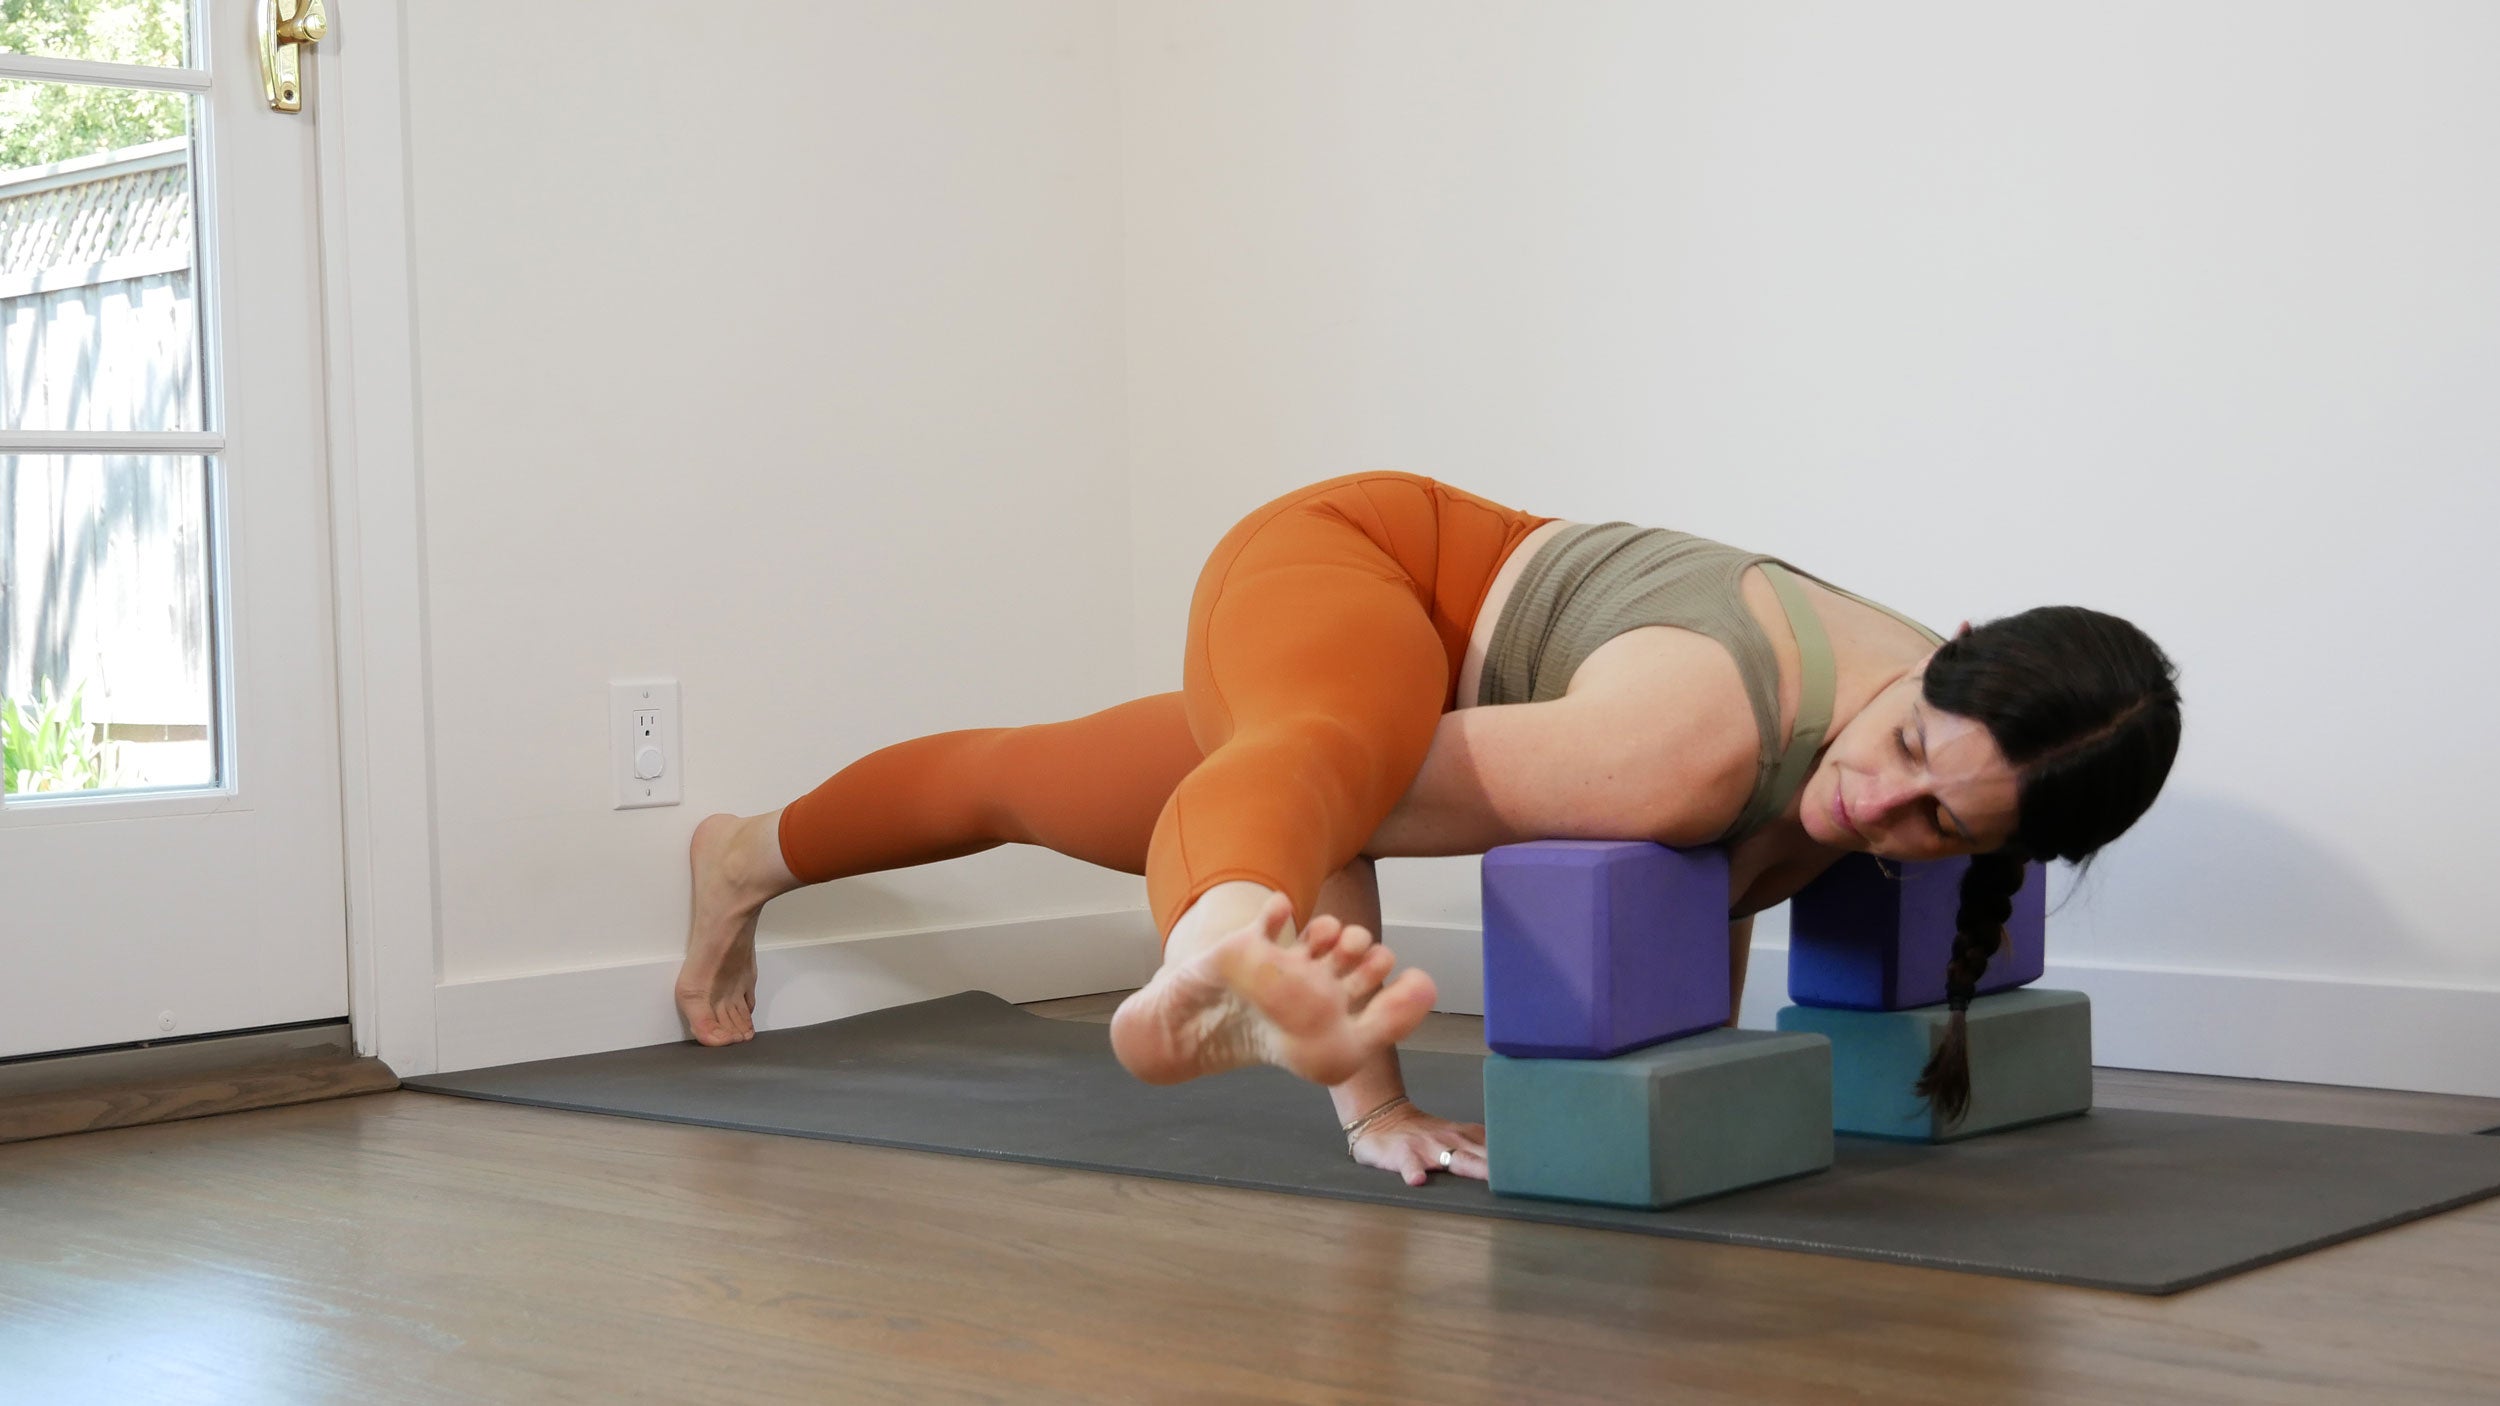 What Is Power Yoga? Characteristics, Poses, and Benefits